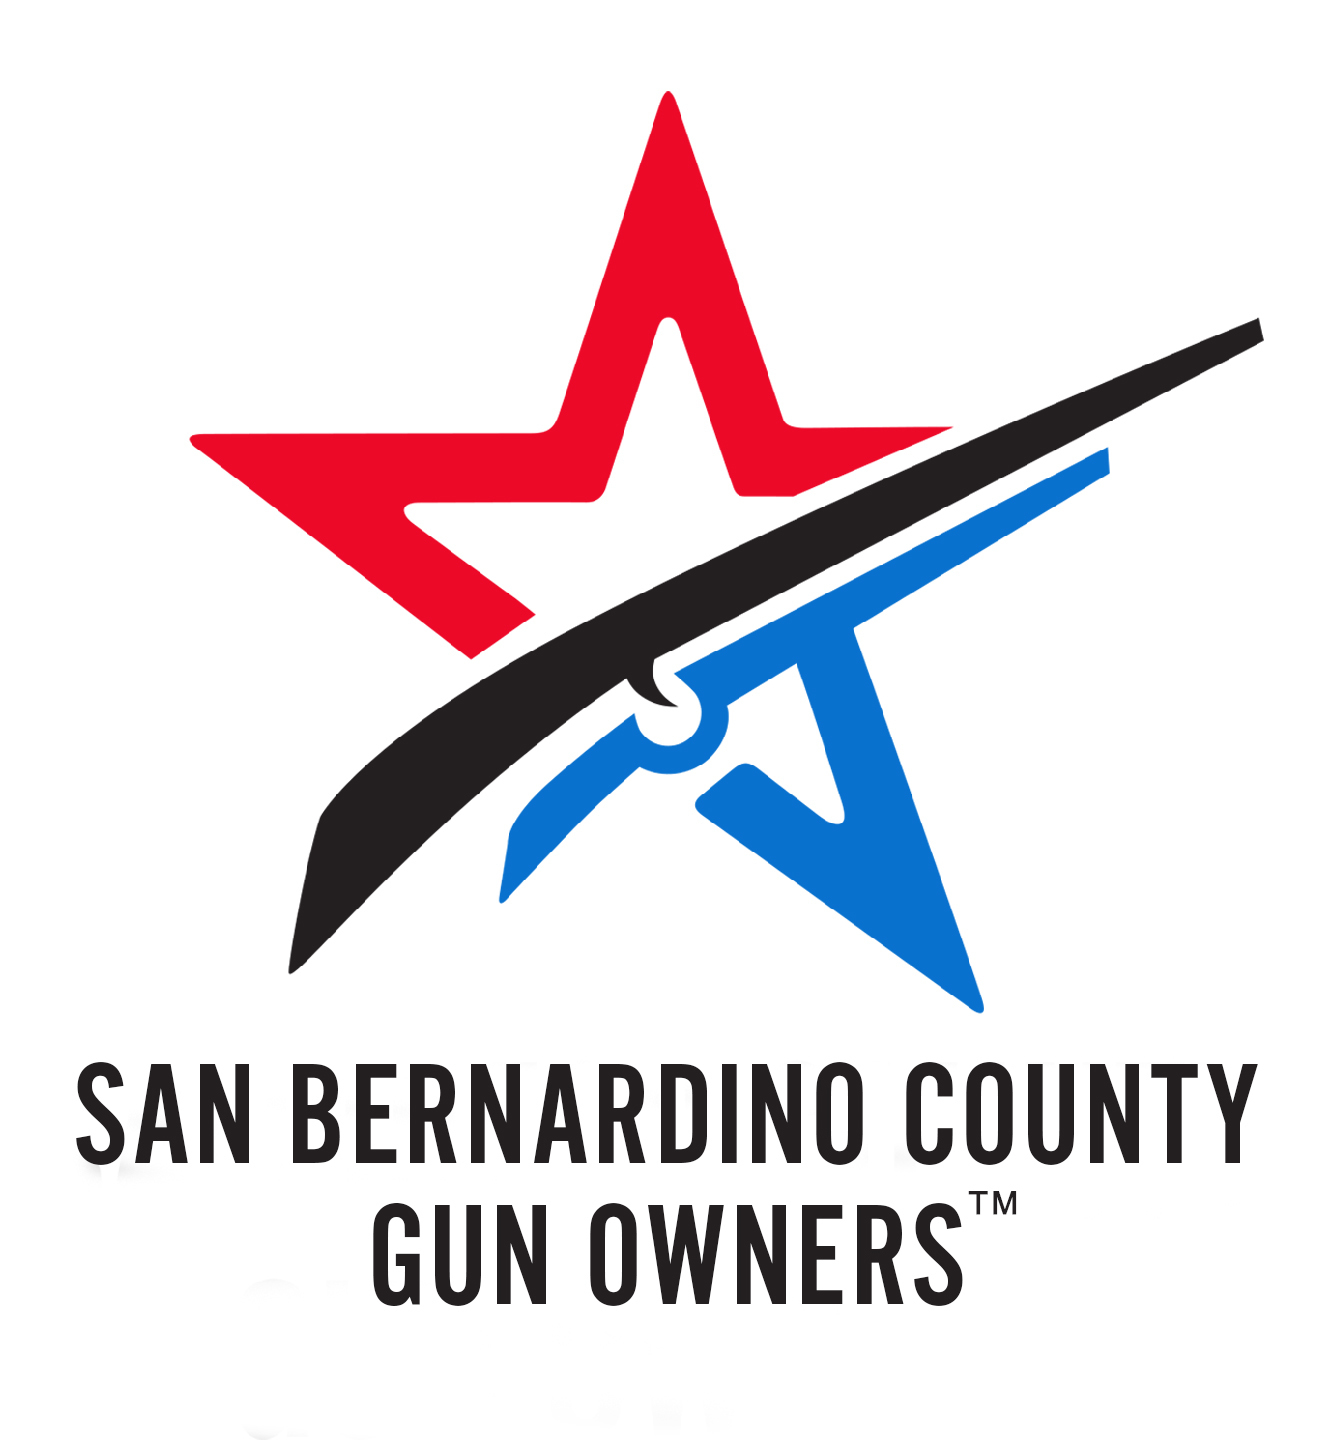 SBCGO Weekly Email 2/4/20: 	What’s the Buzz About SBGunOwners?